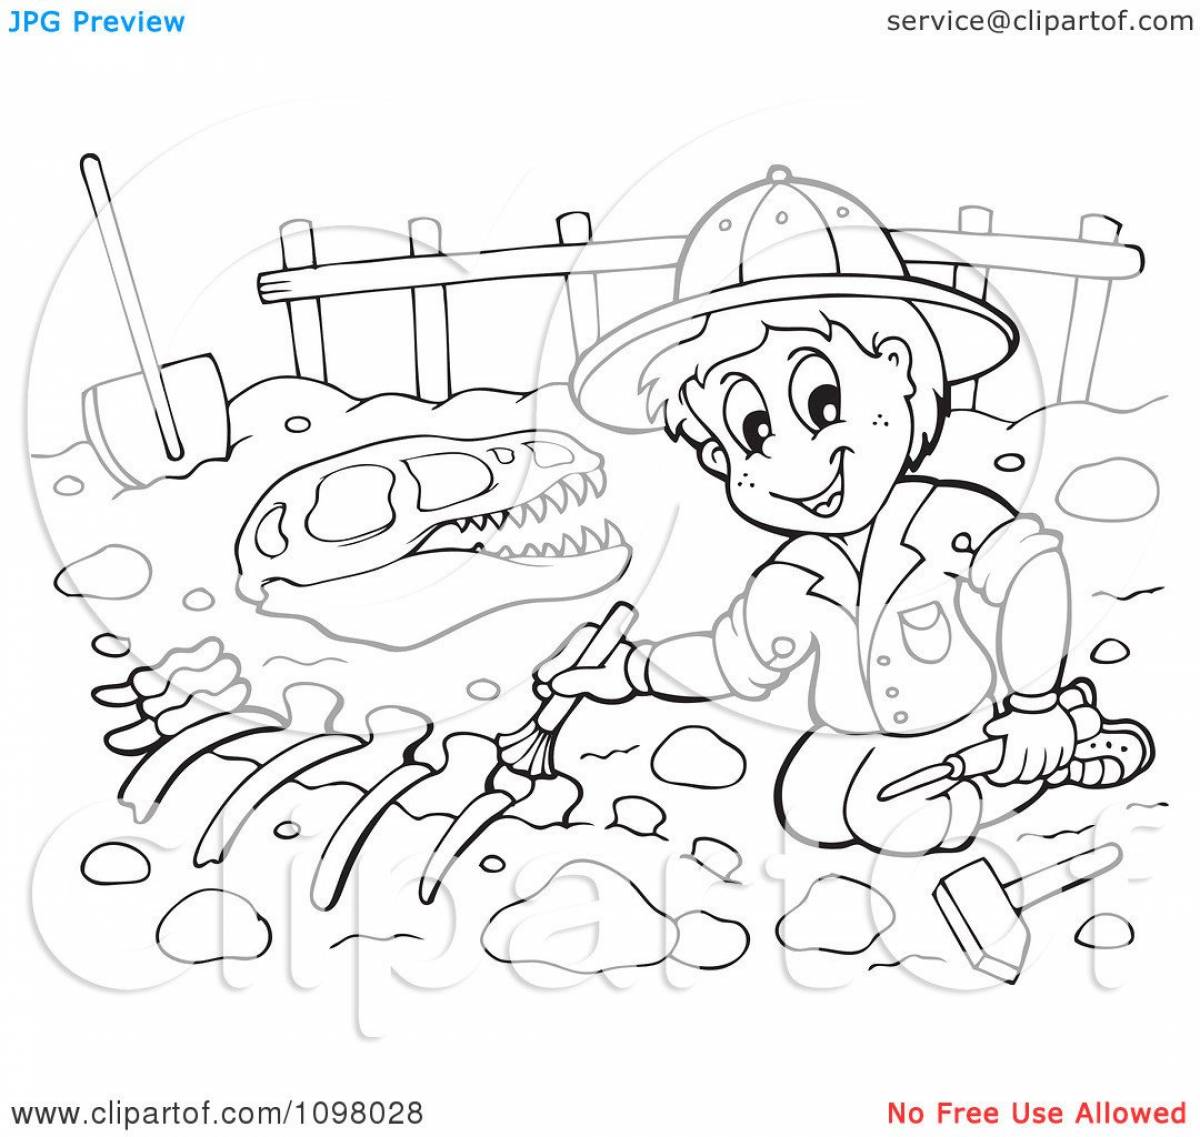 Decided archaeologist coloring page